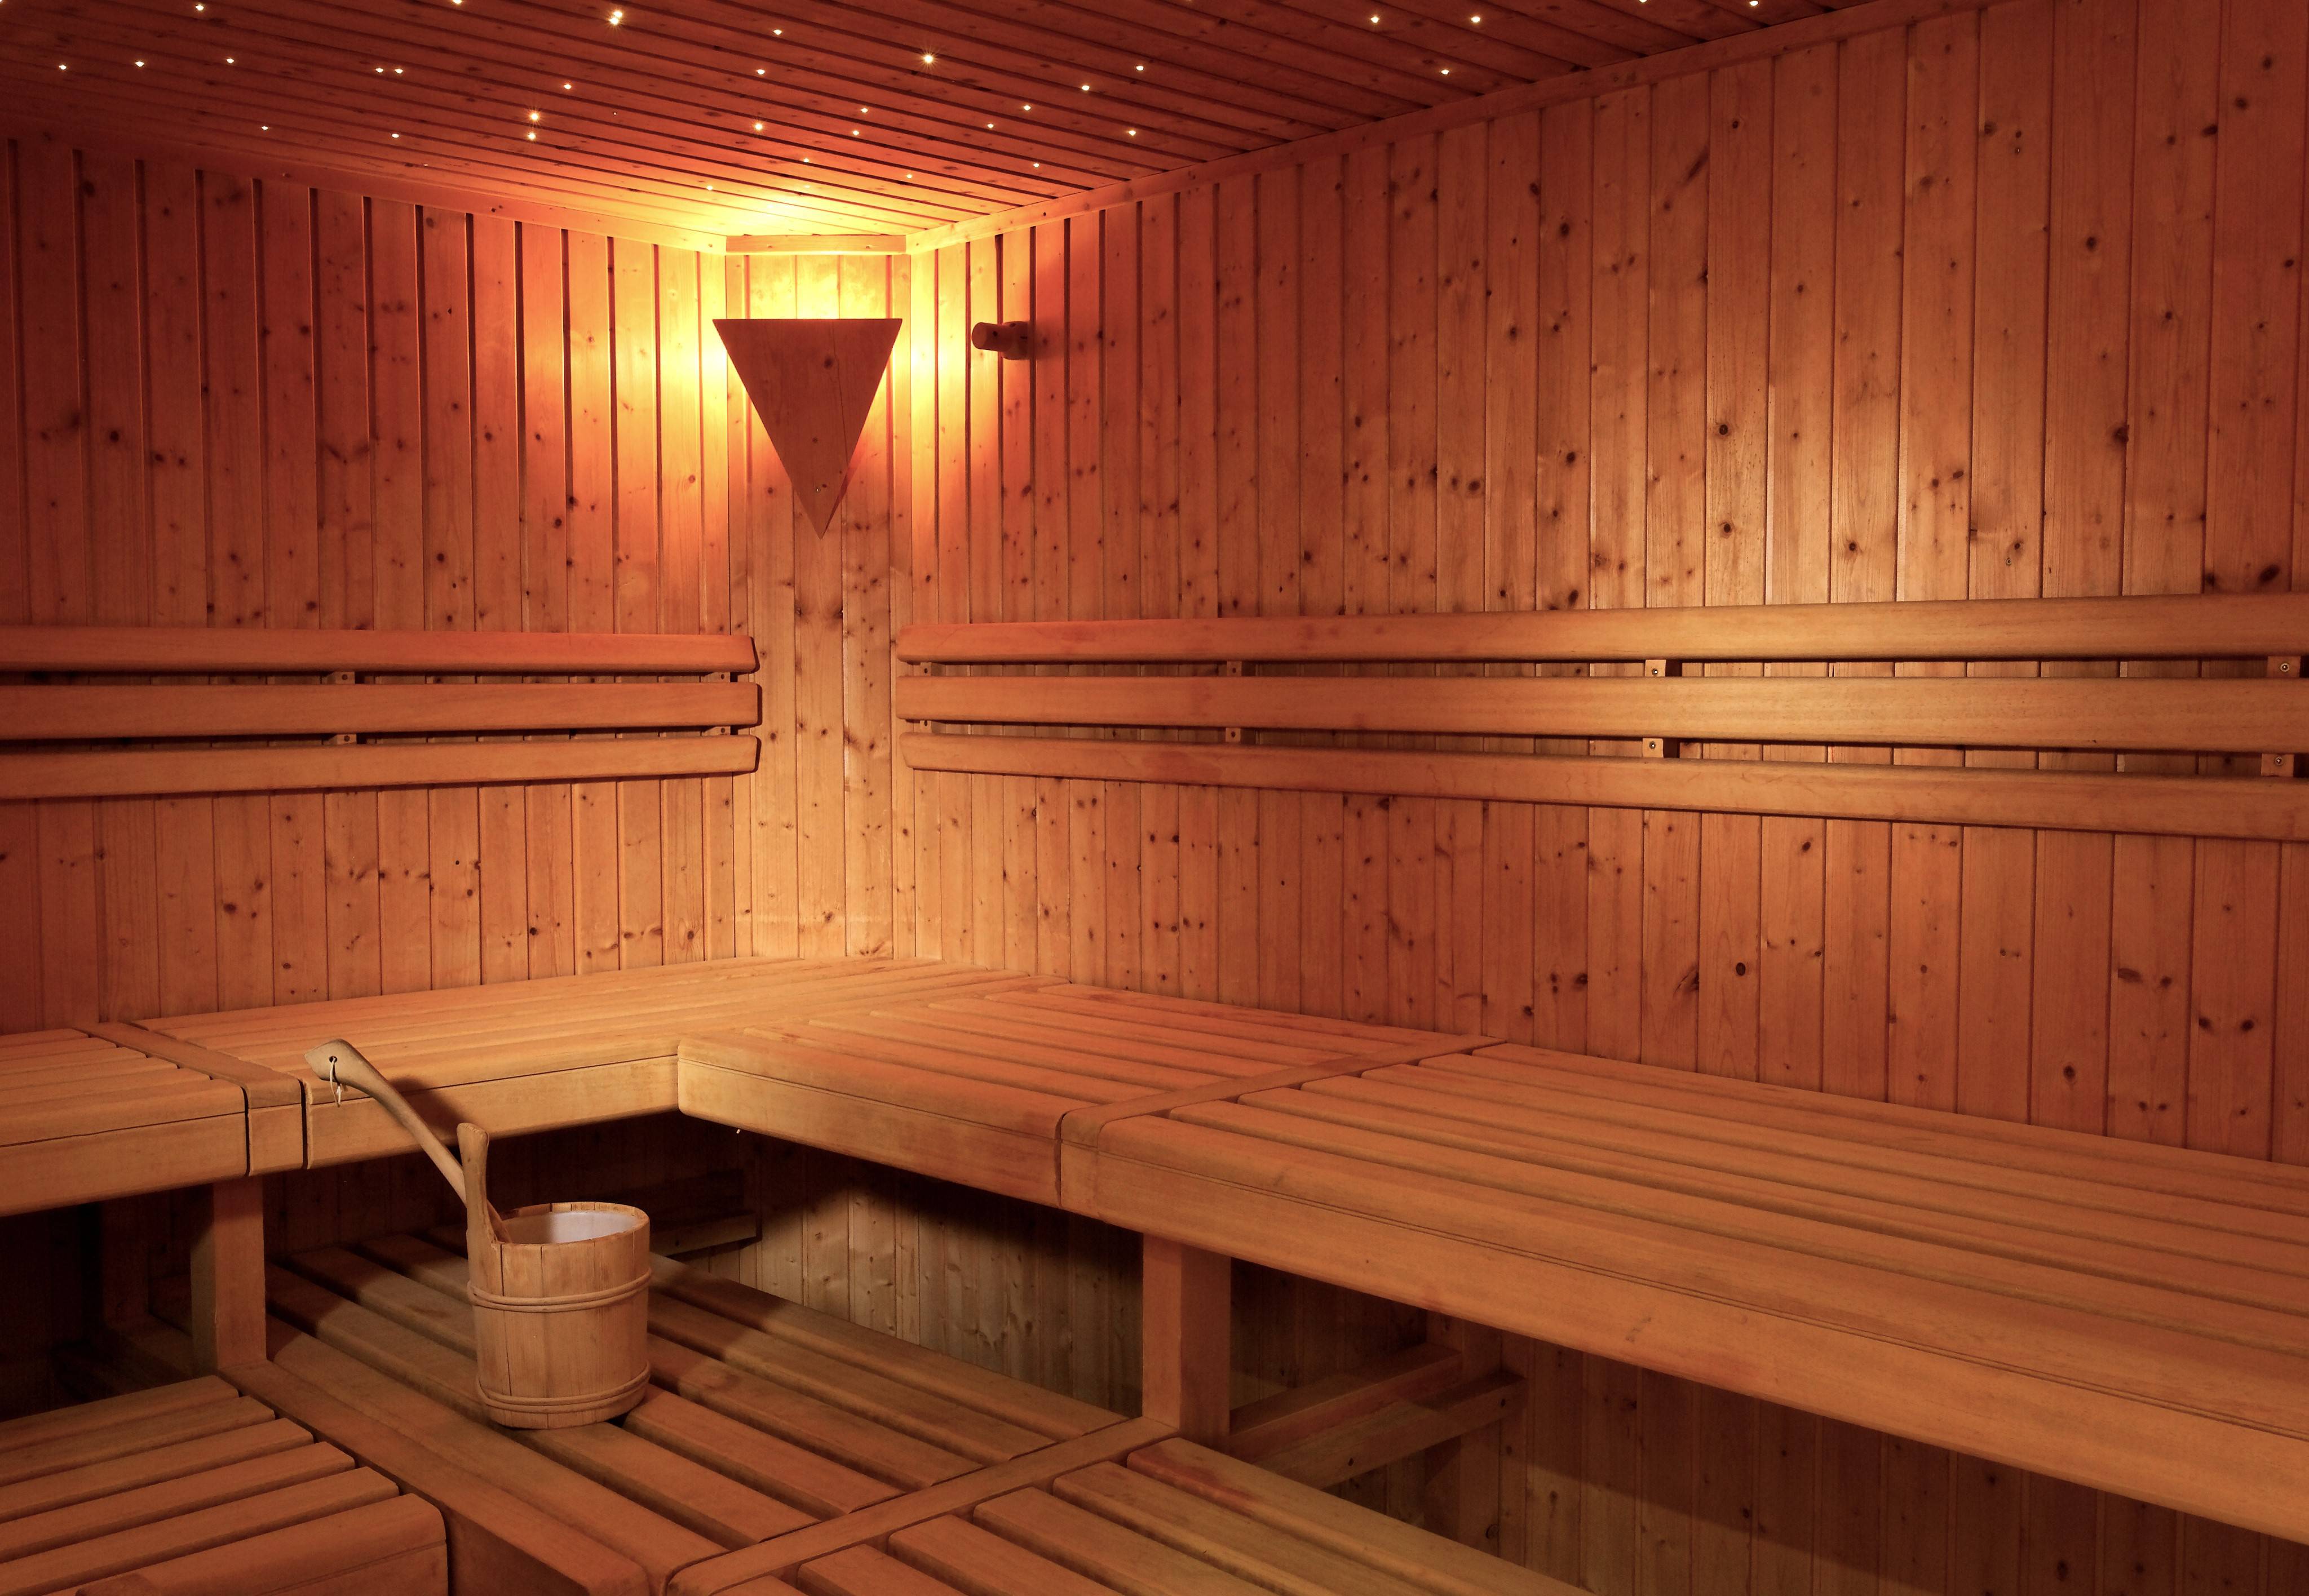 The power of fire: Sauna, steam-room and infrared cabin - Hotel Gstaaderhof